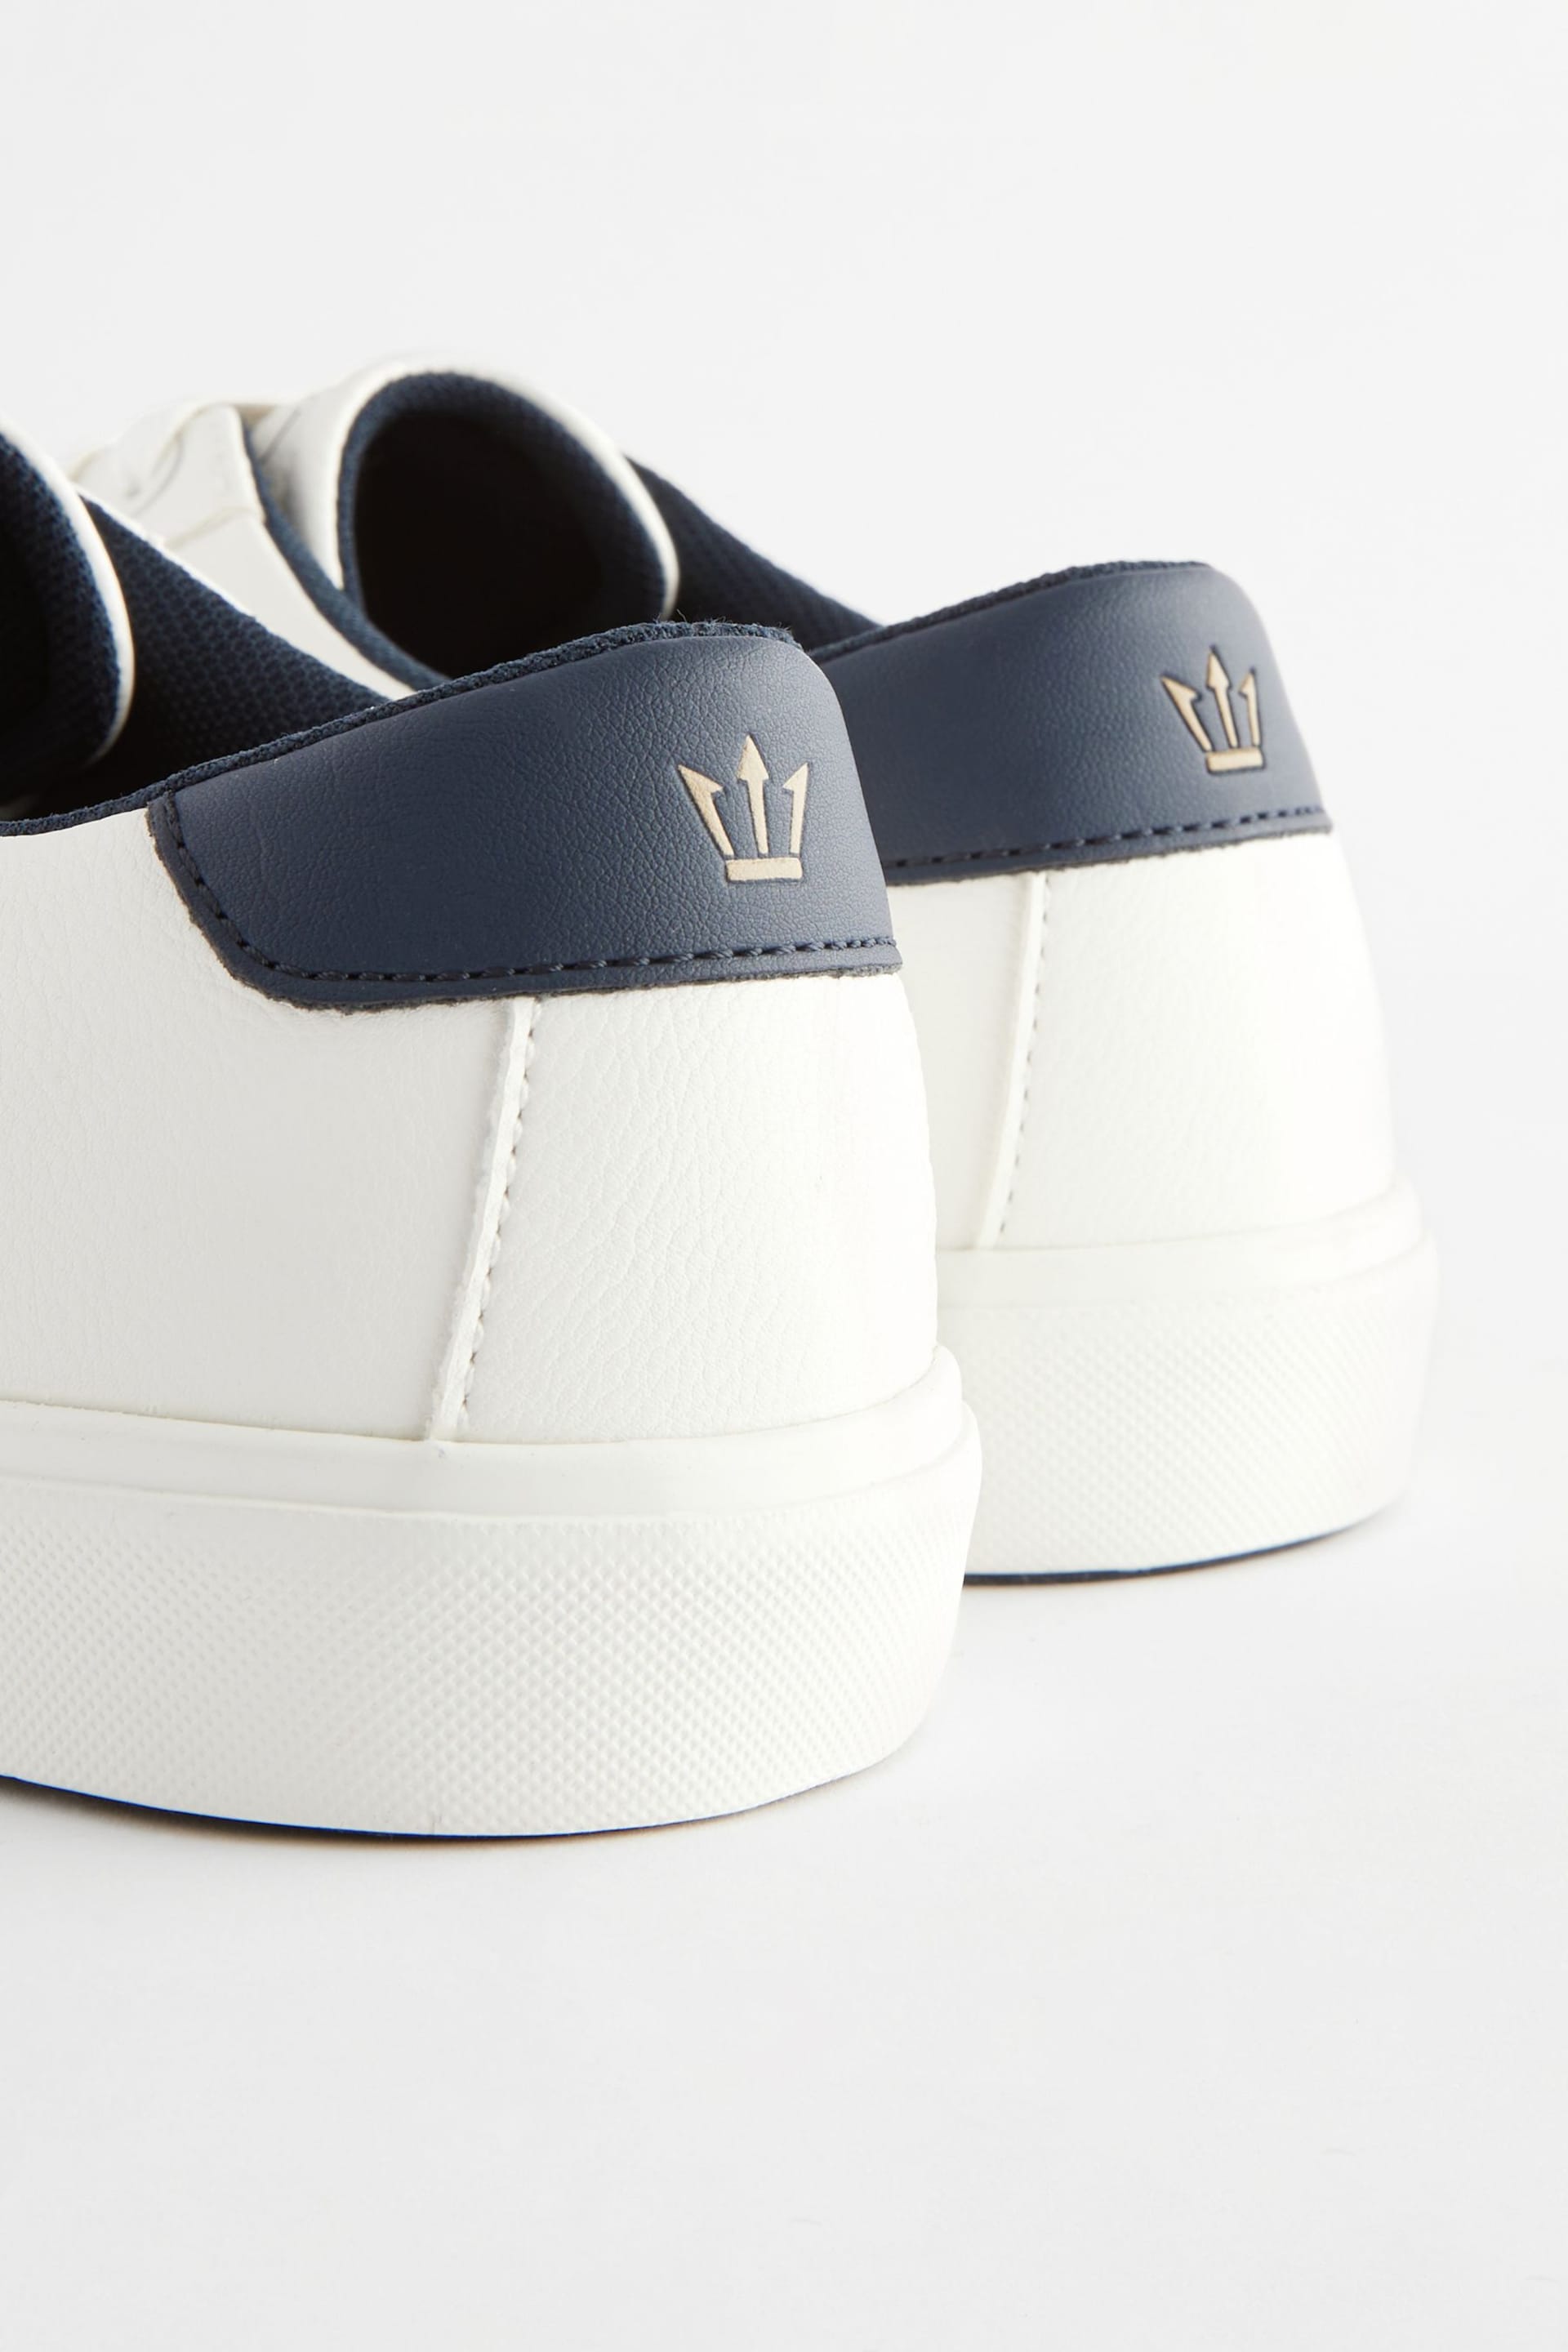 White Side Stripe Trainers - Image 5 of 6